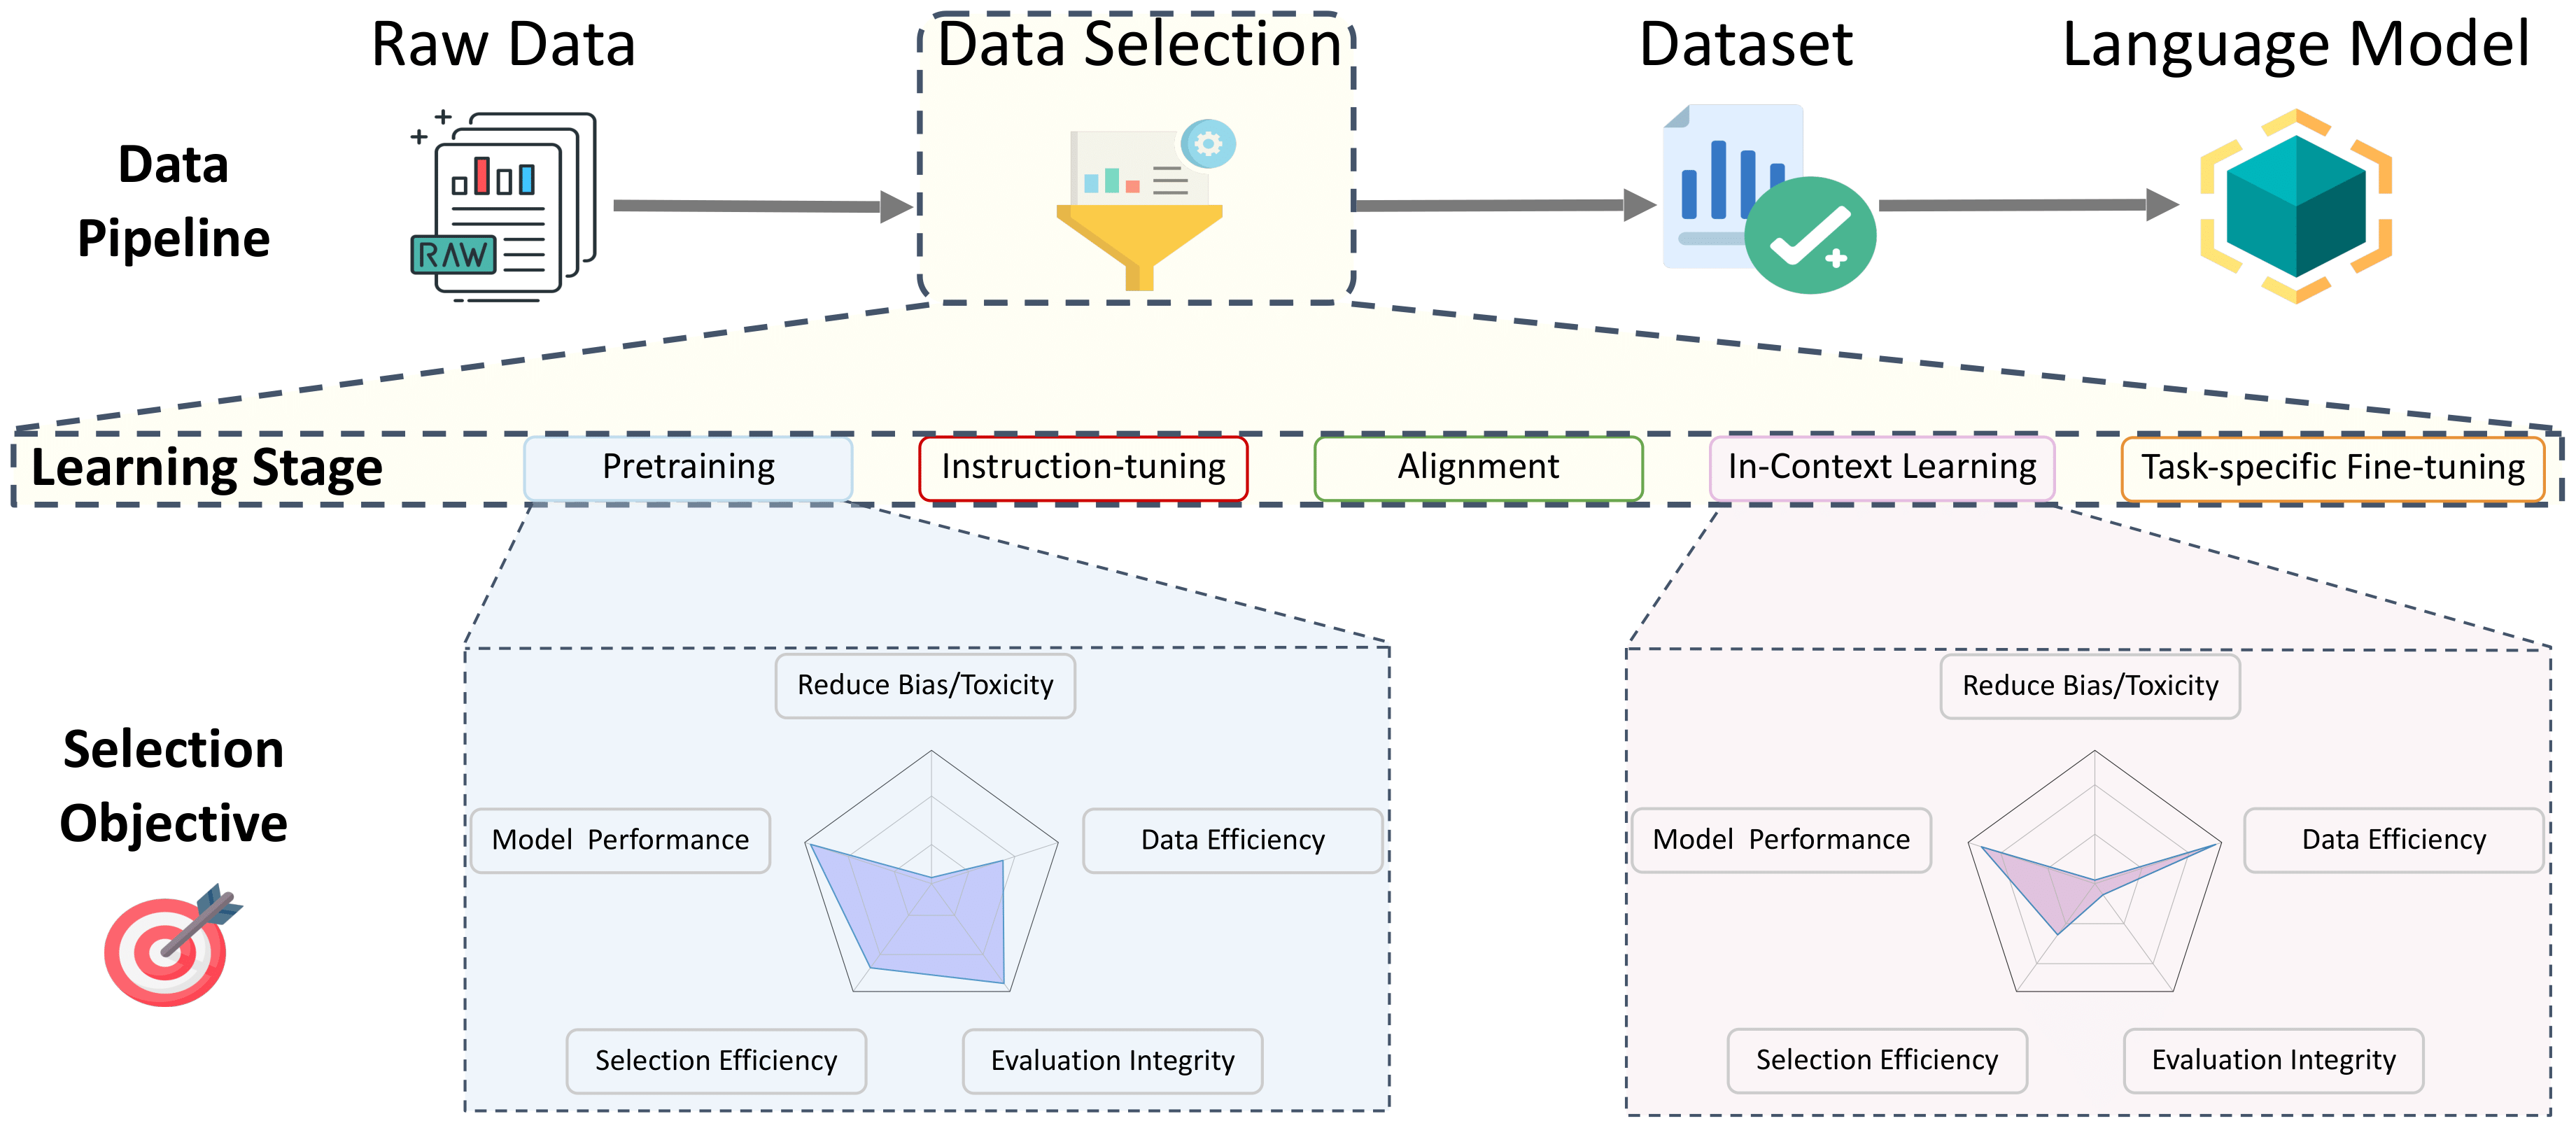 A conceptual demonstration of the data pipeline for language model training